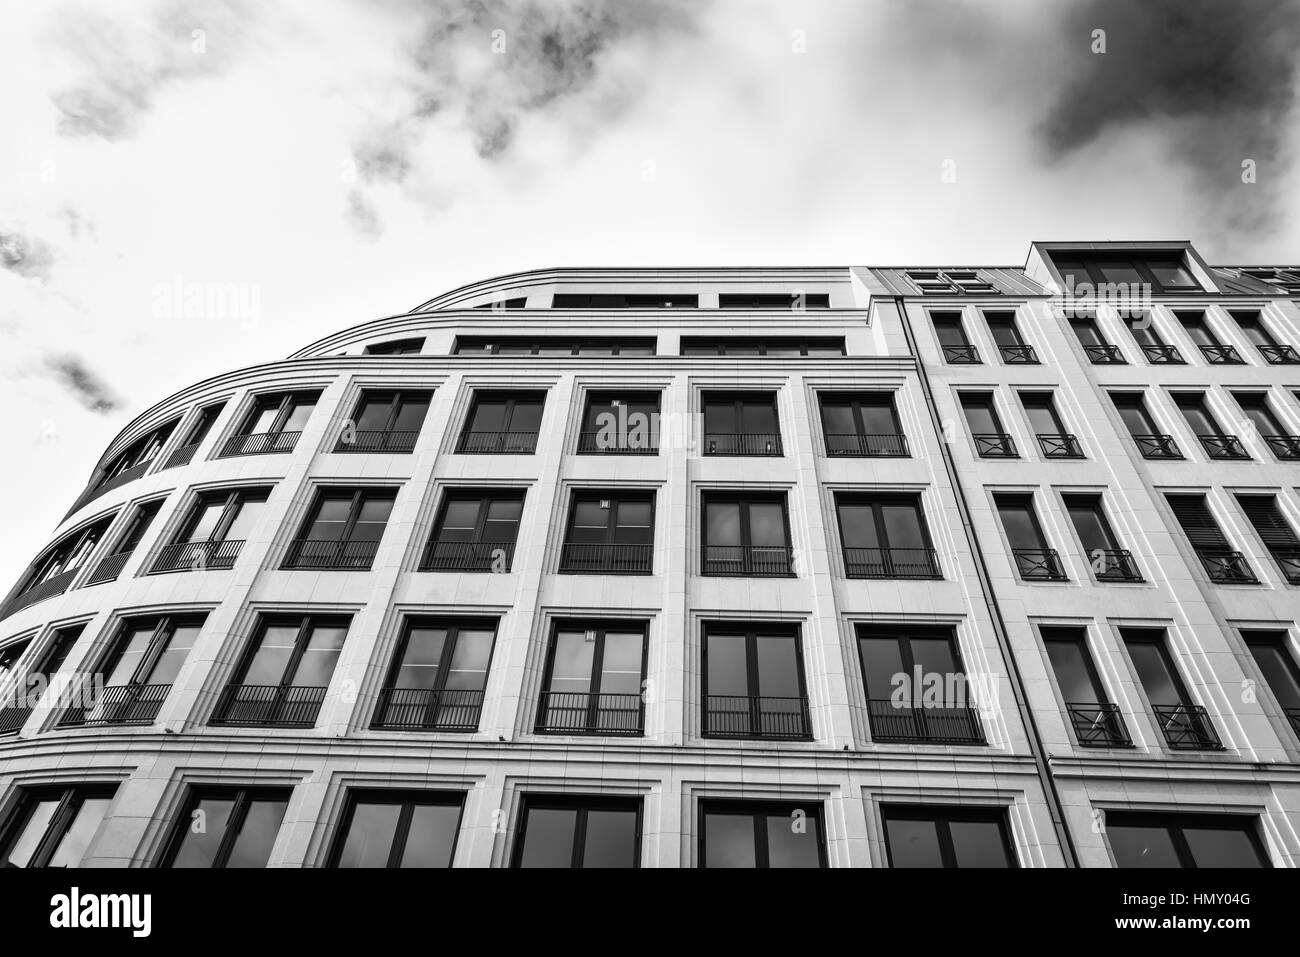 ESSEN, GERMANY - JANUARY 25, 2017: The facae of an office building at Rüttenscheider Straße contrasts with the vivid sky Stock Photo